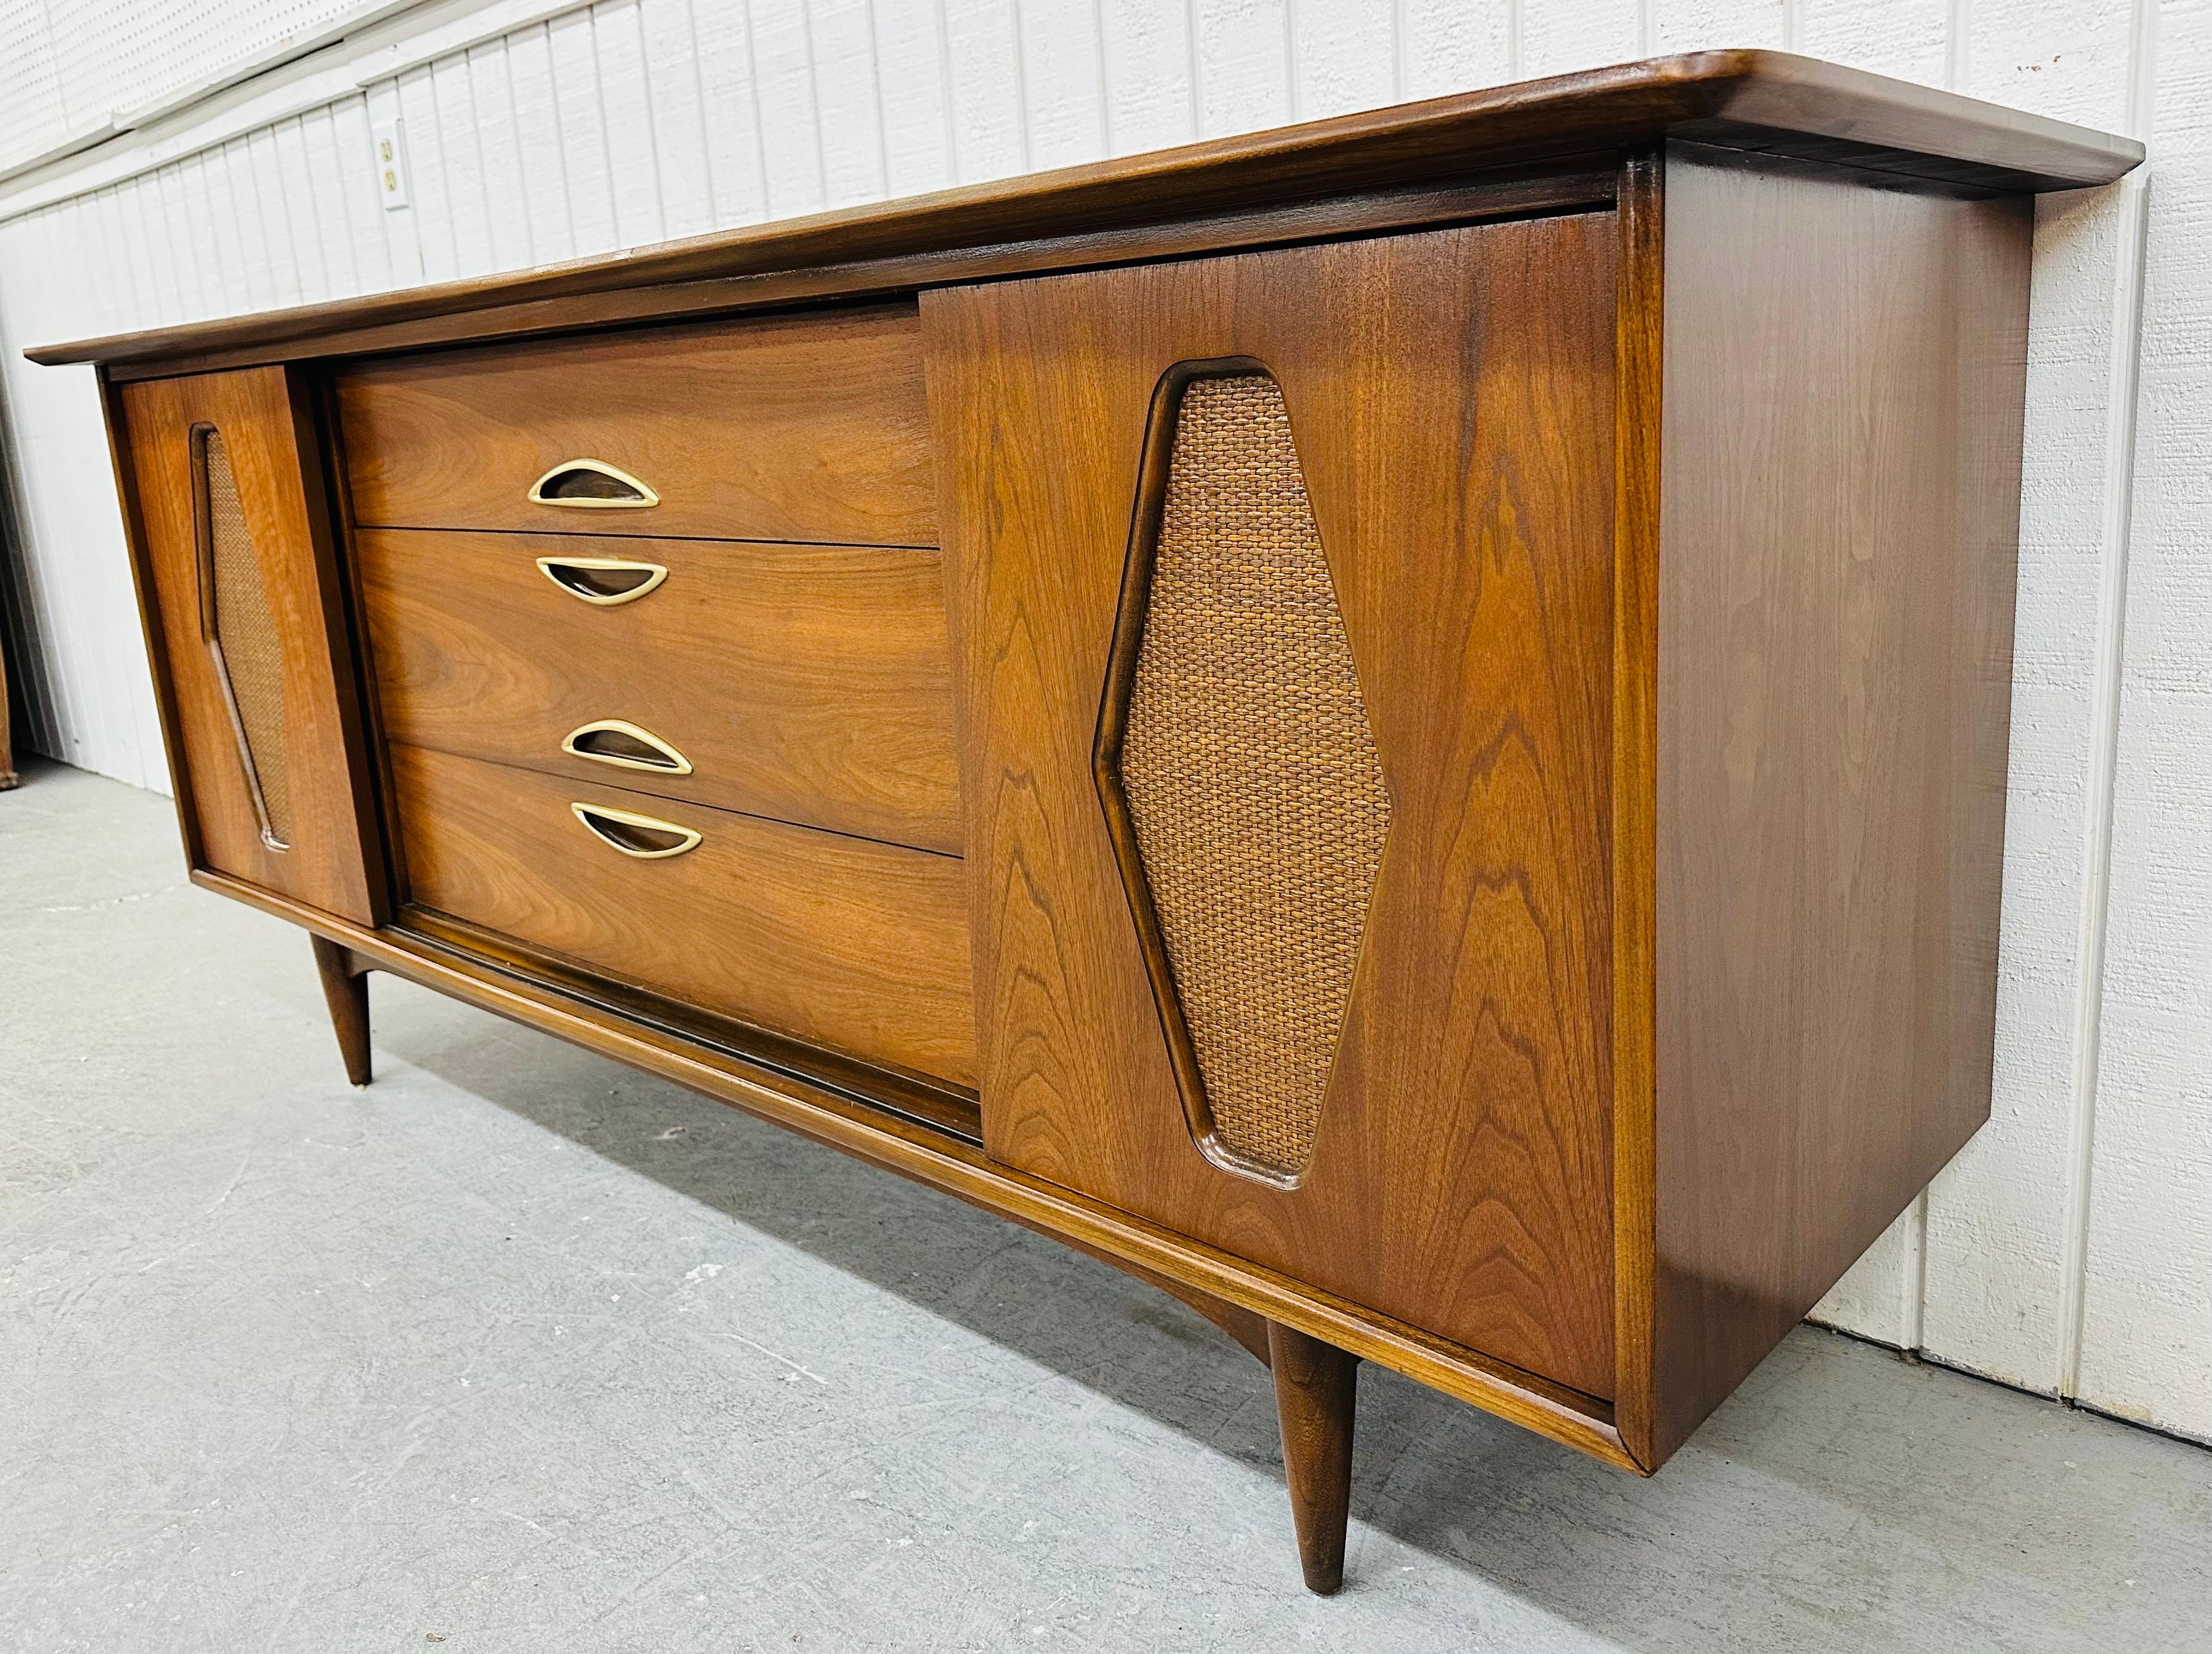 This listing is for a Mid-Century Modern Kent Coffey Greenbrier Walnut Dresser. Featuring a unique shaped top, sliding cane doors that reveal six hidden drawers, three larger drawers in the center, original brass hardware, modern legs, and a